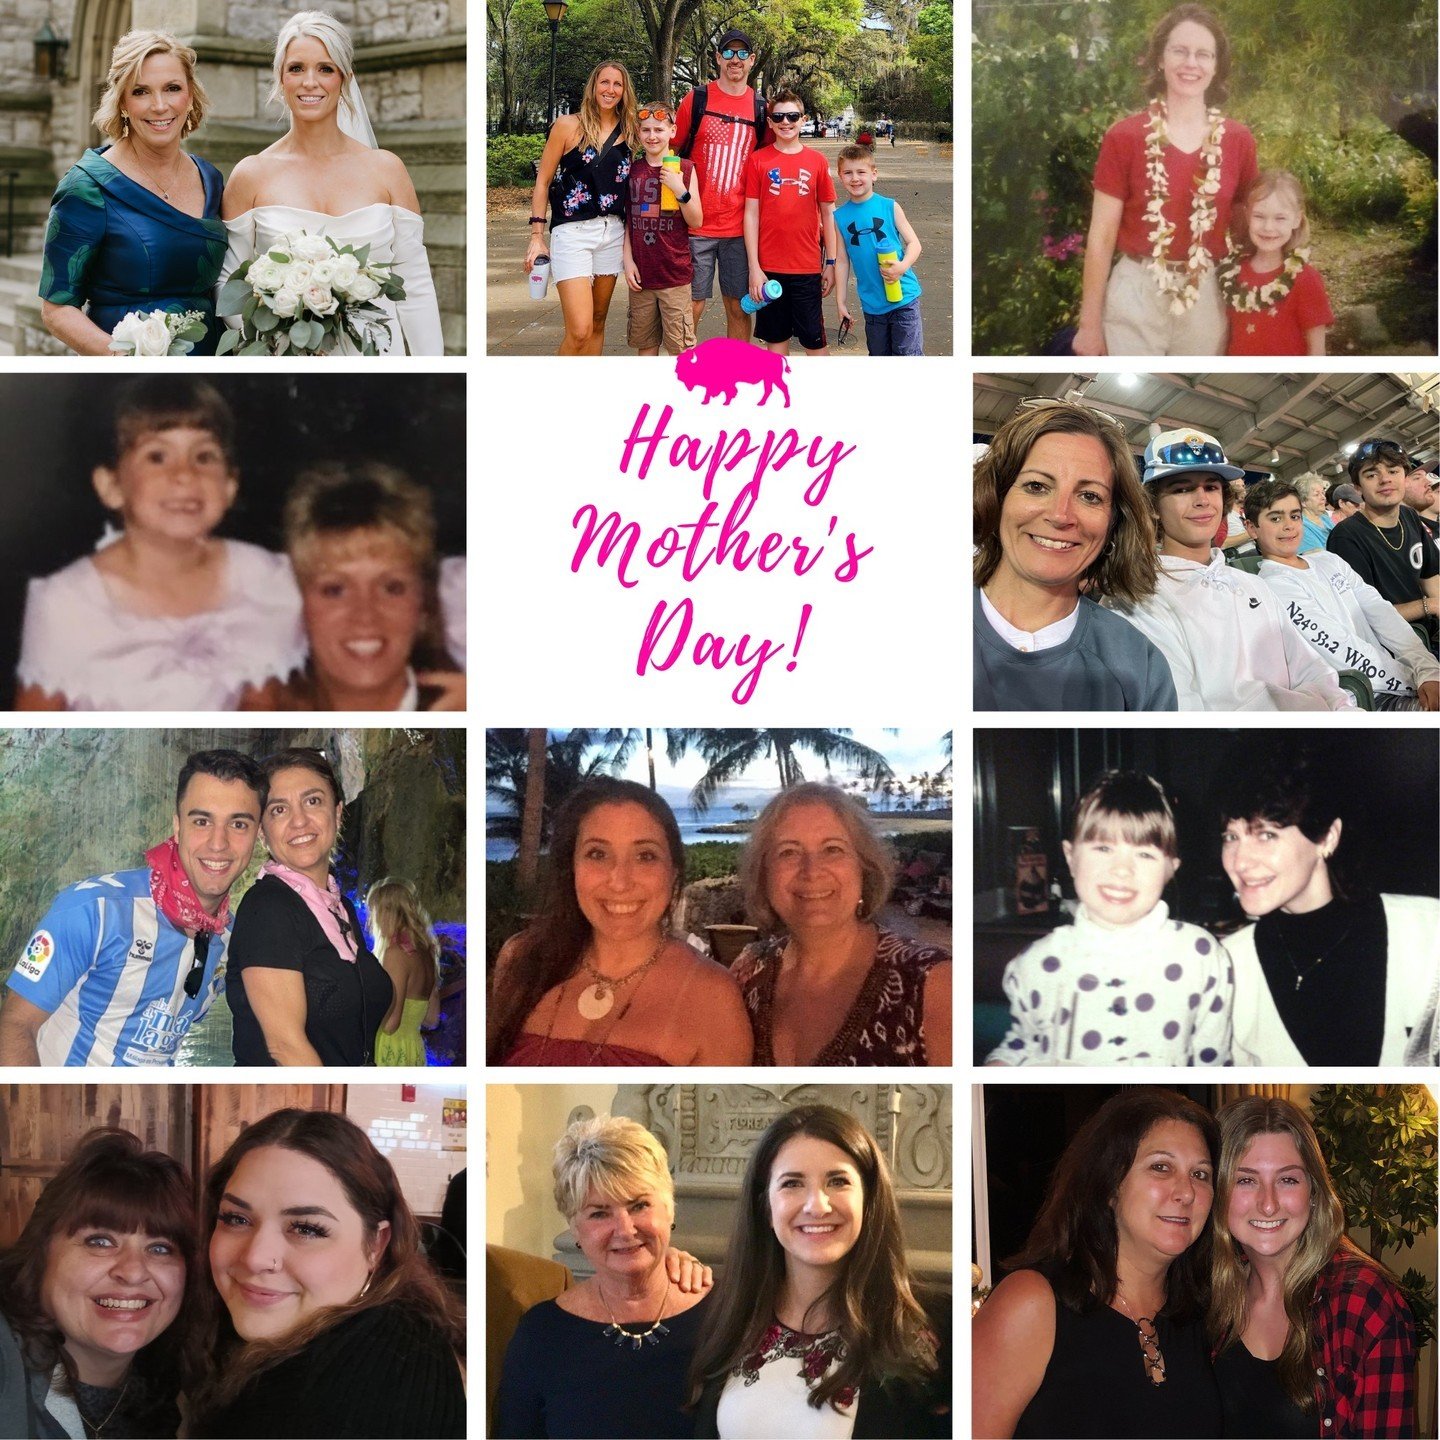 Happy Mother's Day from the @StaffBuffalo team!

Today, we celebrate all the amazing moms in our lives: the ones on our team who inspire us with their strength and dedication as they juggle work and family, and our own moms, whose love and support ha